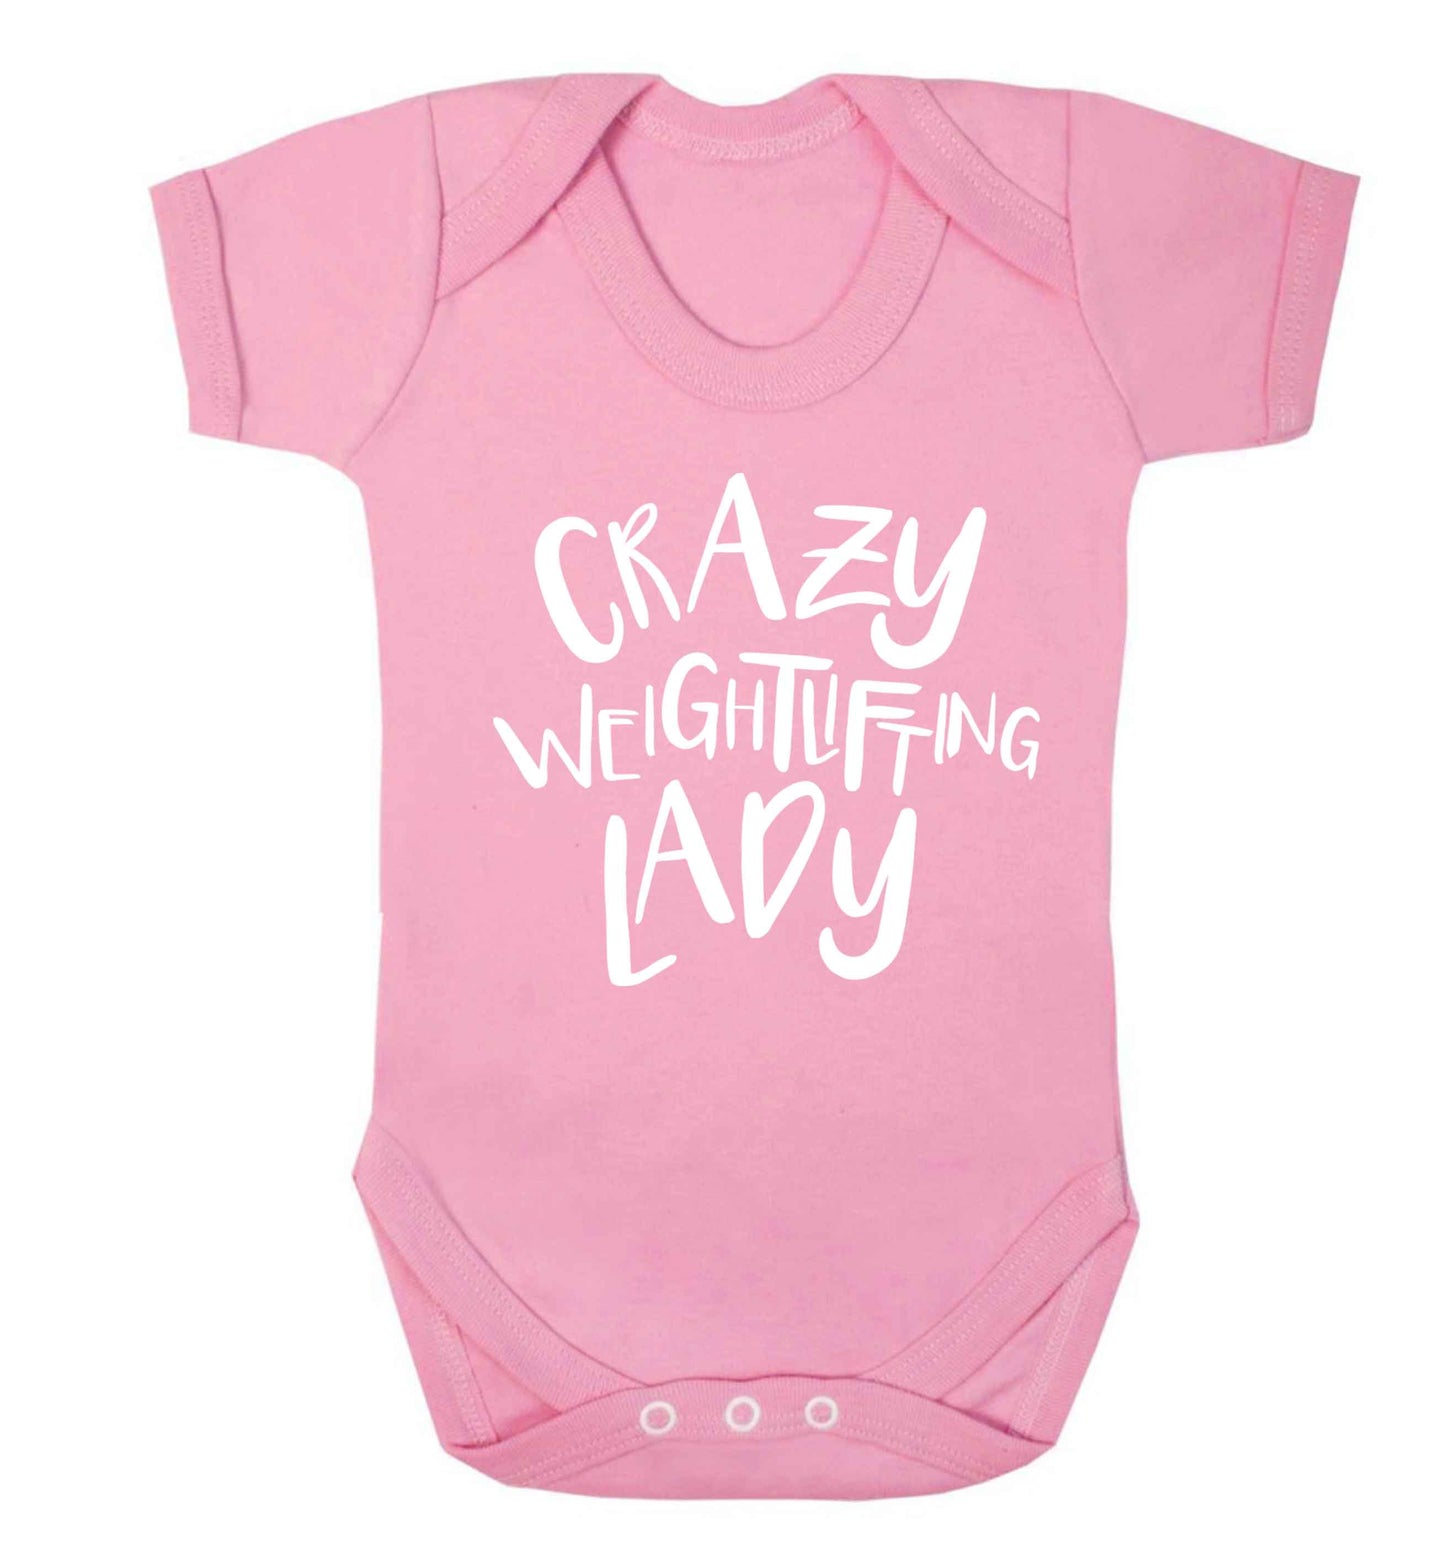 Crazy weightlifting lady Baby Vest pale pink 18-24 months